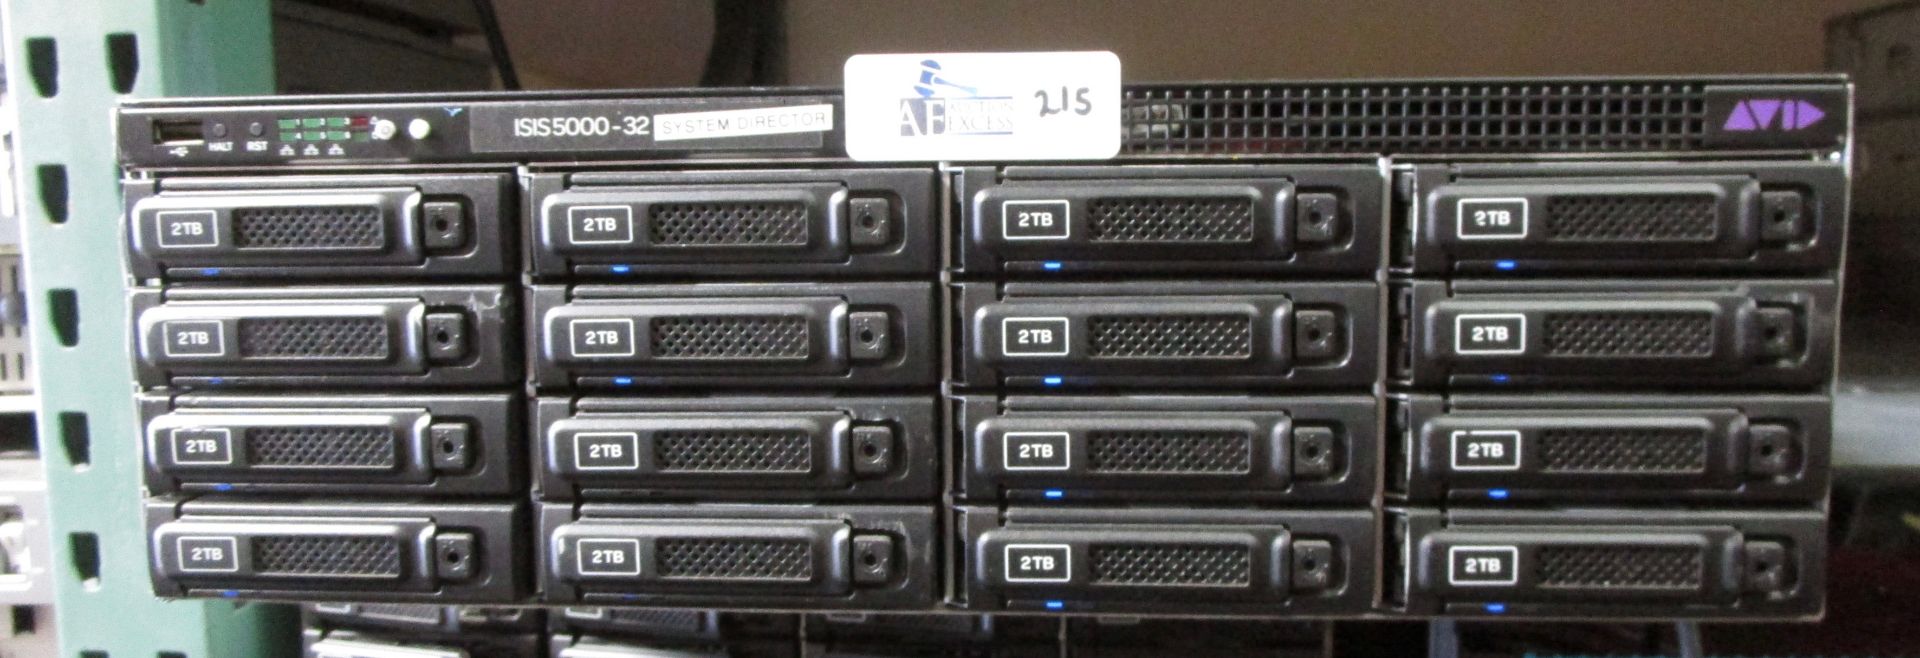 LOT OF ISIS 5500 WITH 2TB HARD DRIVES